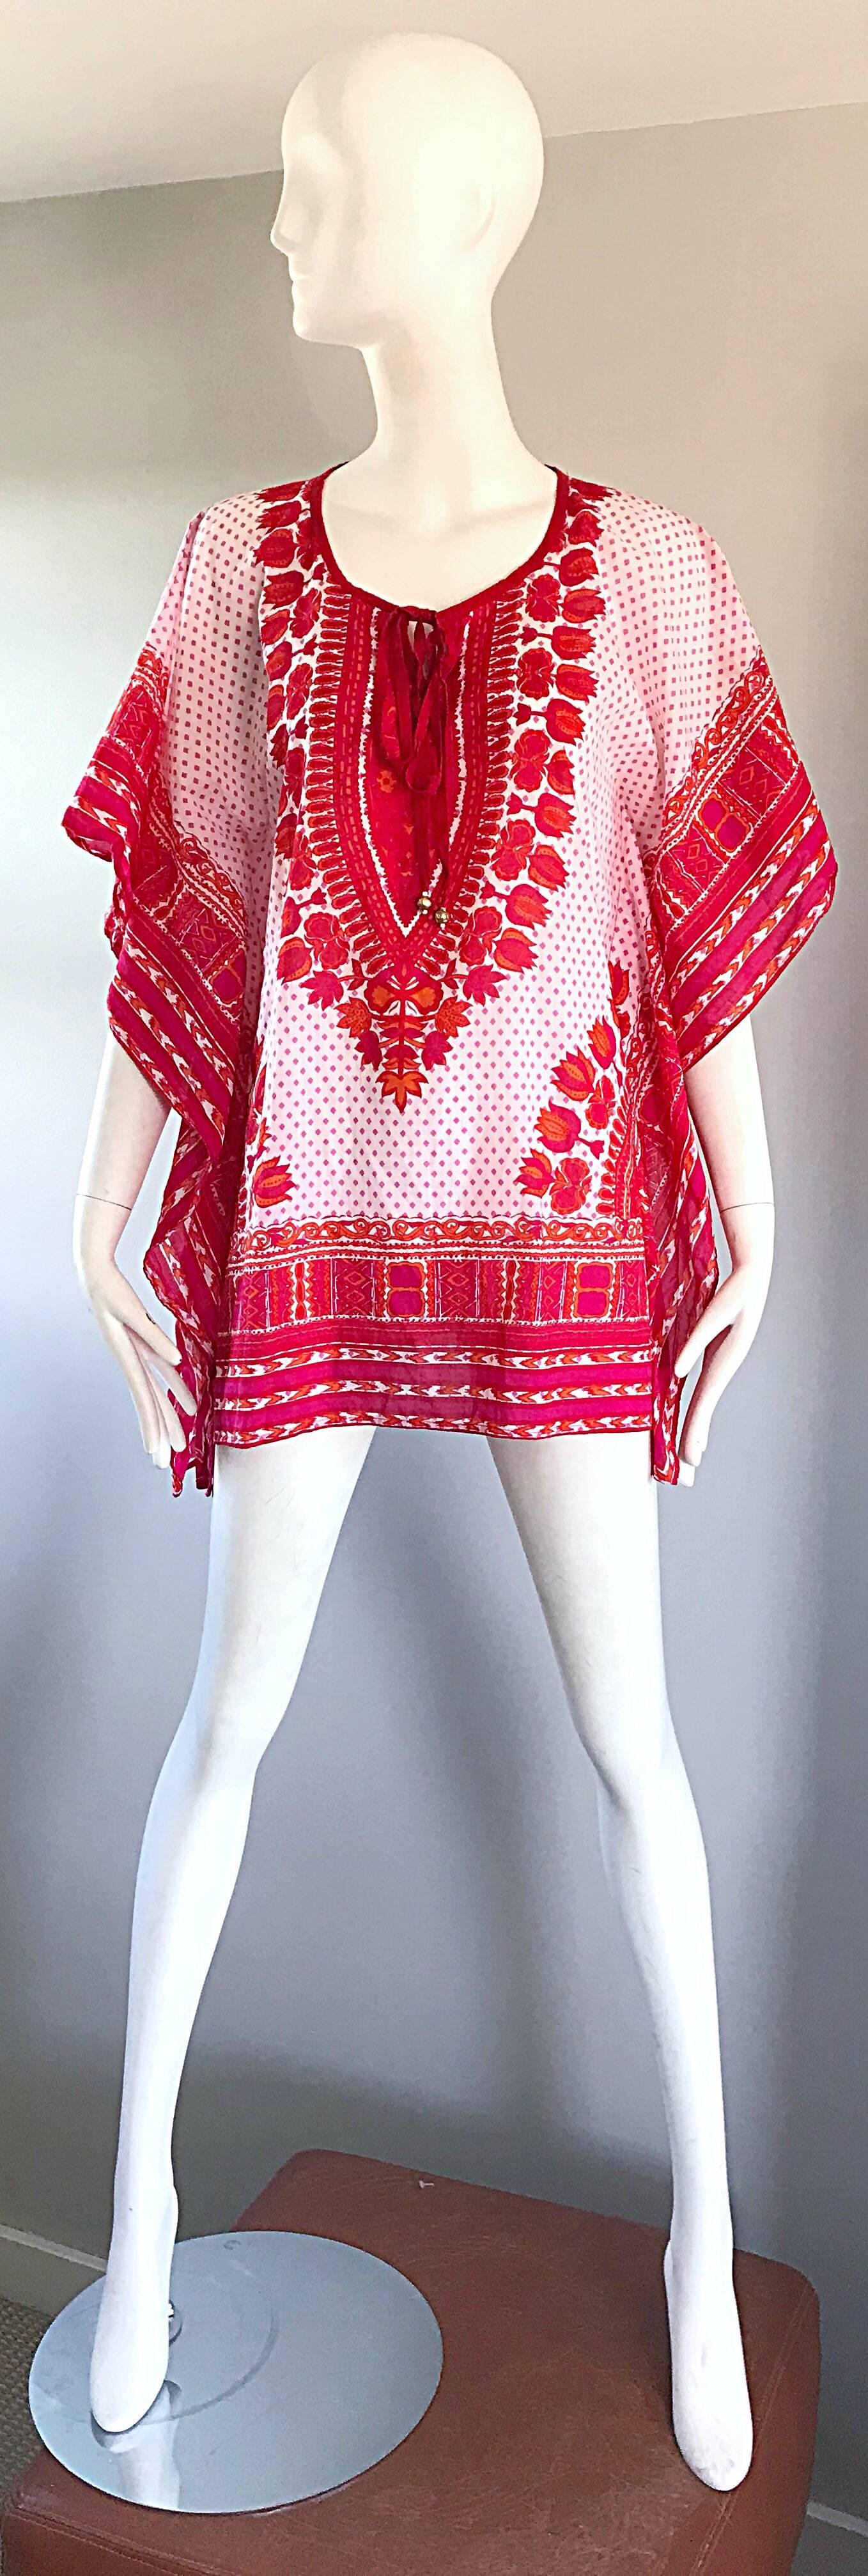 Superb 70s BIBA hot pink / fuchsia, orange, and red boho kaftan tunic blouse! Features an ethnic print in vibrant colors. Gold / brass beads at the end of each tie at neck. Dolman sleeves can fit an array of sizes. Soft lightweight cotton is light